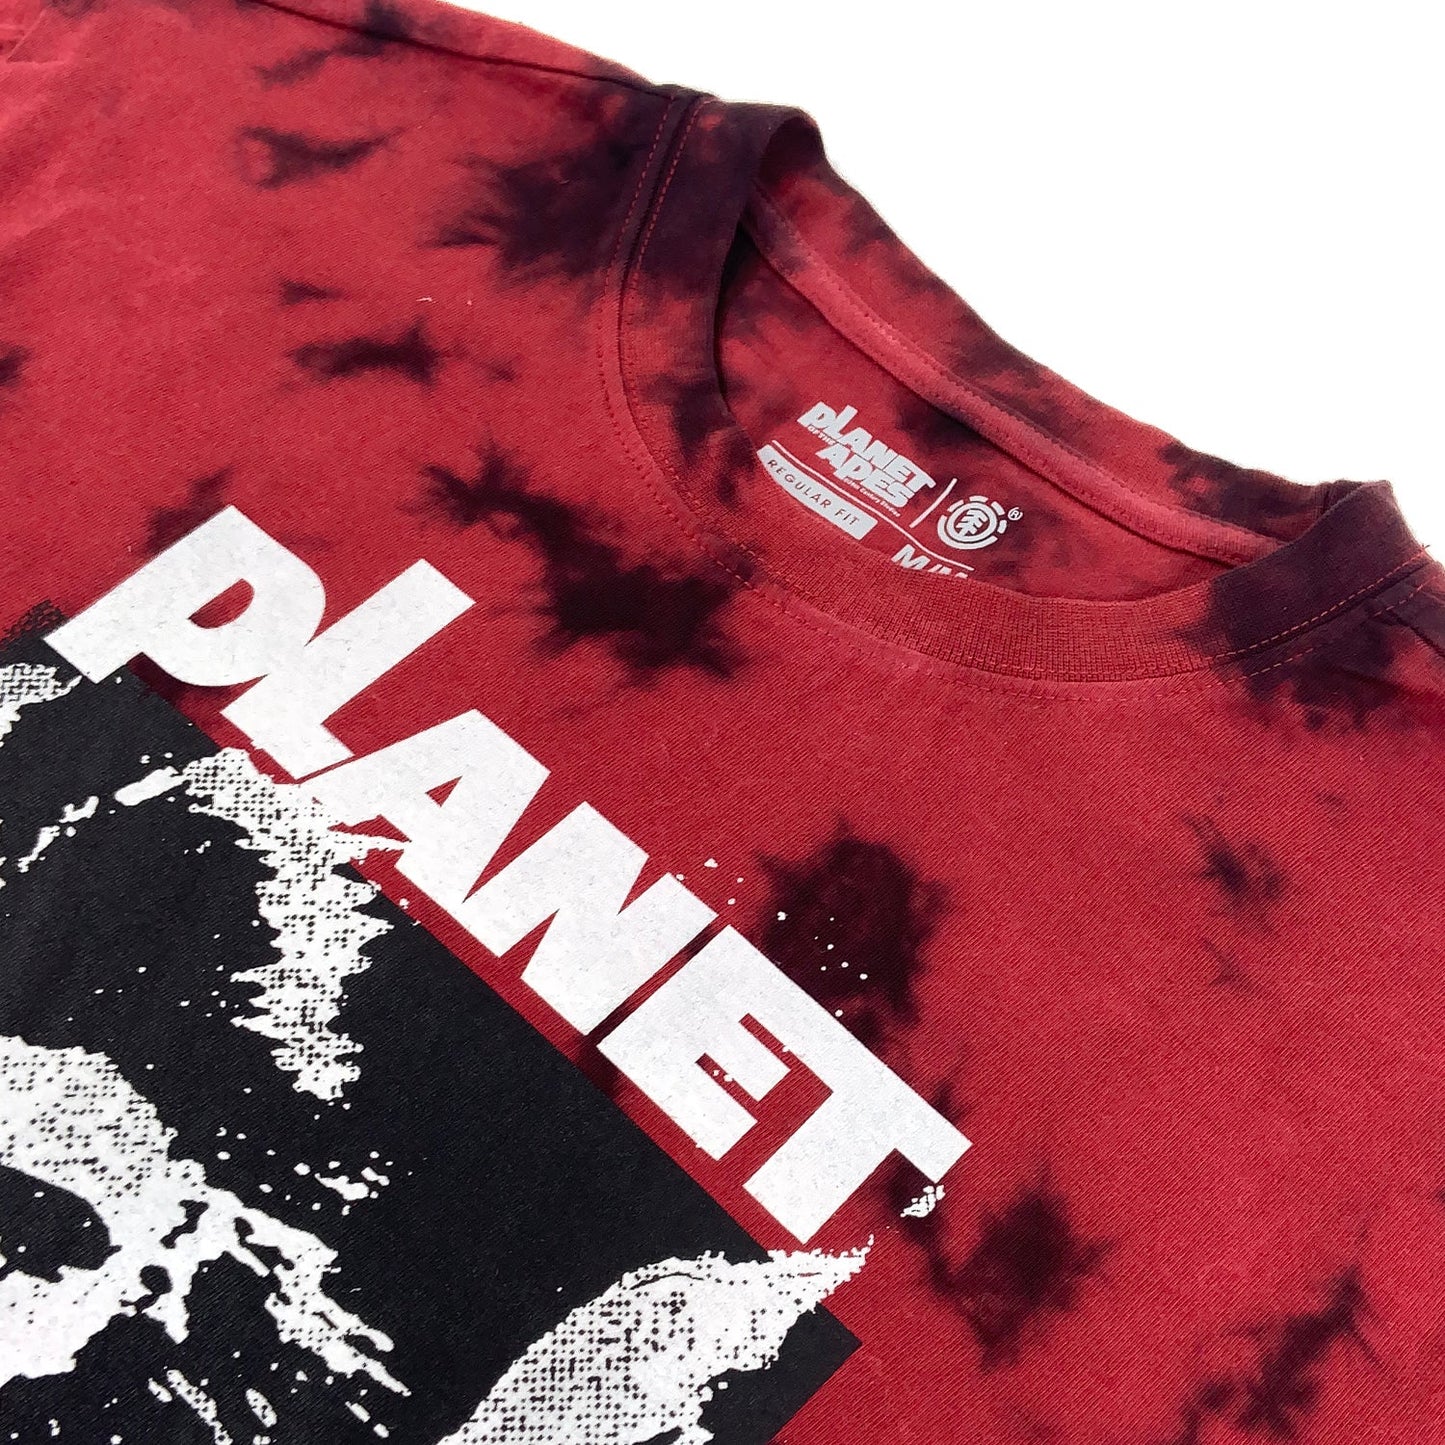 Element x Planet of the Apes - Surge T-shirt - Red/Black - Prime Delux Store